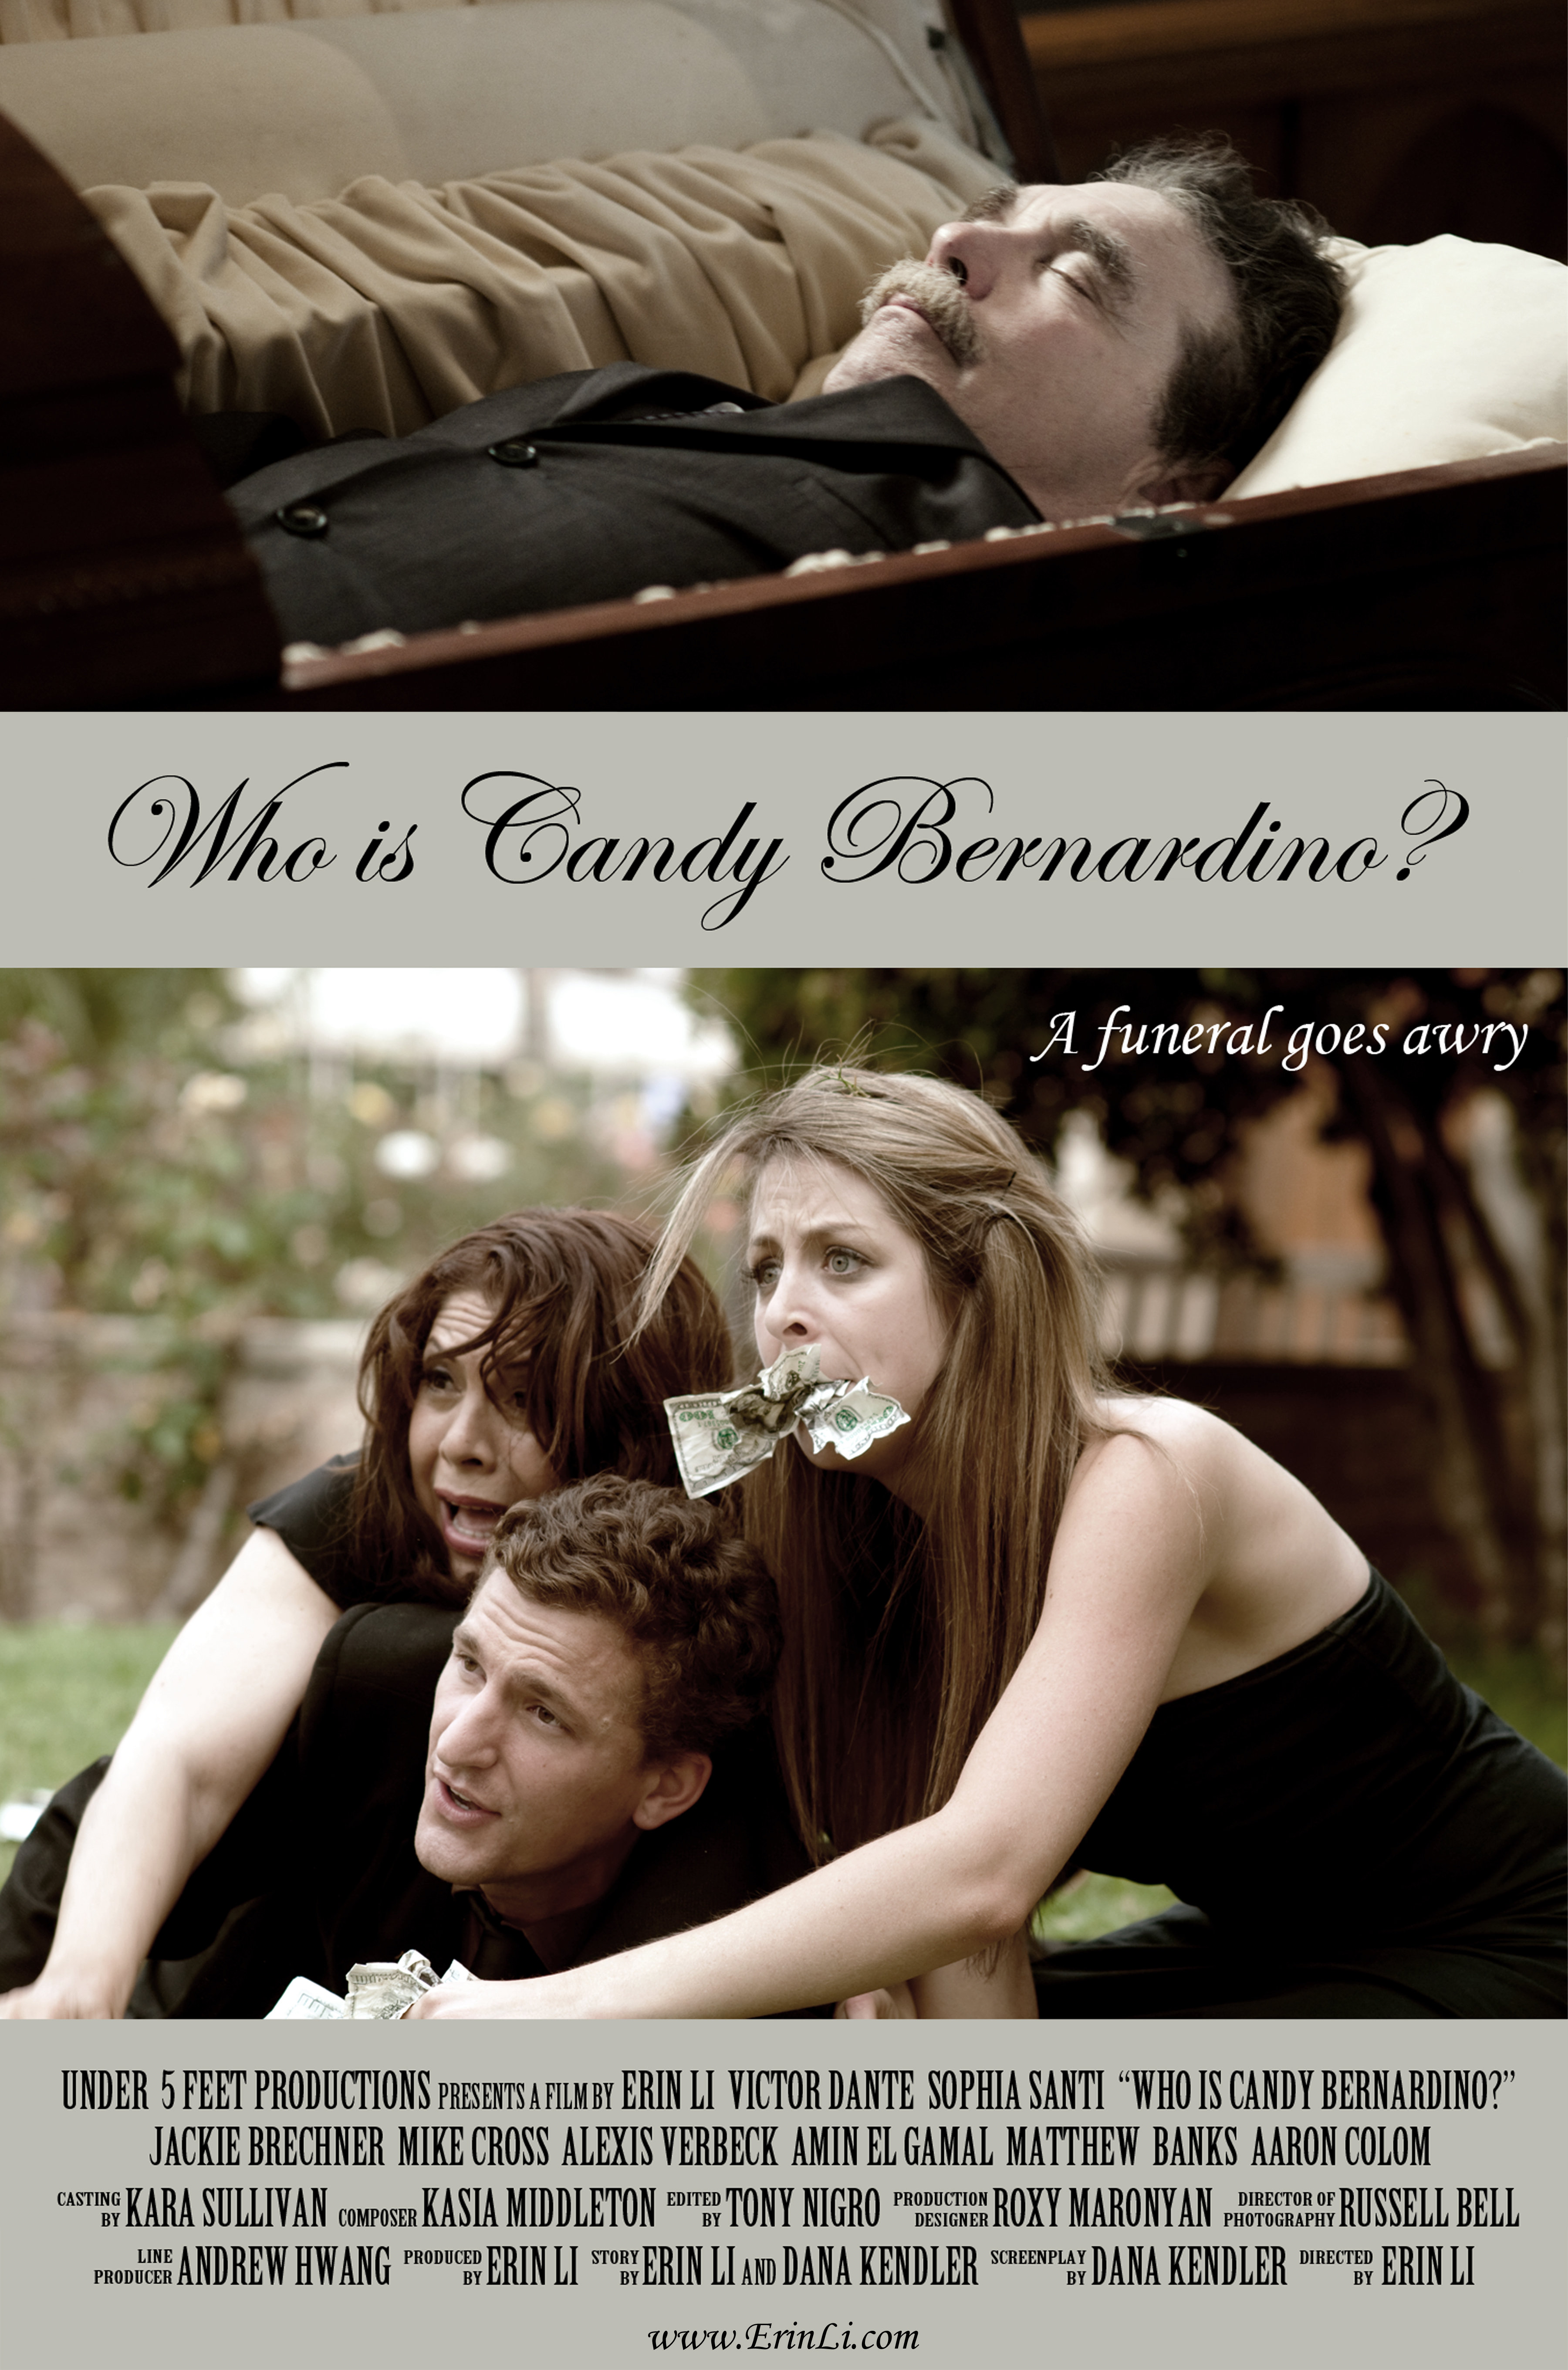 Official Poster: Who is Candy Bernardino? Directed by Erin Li